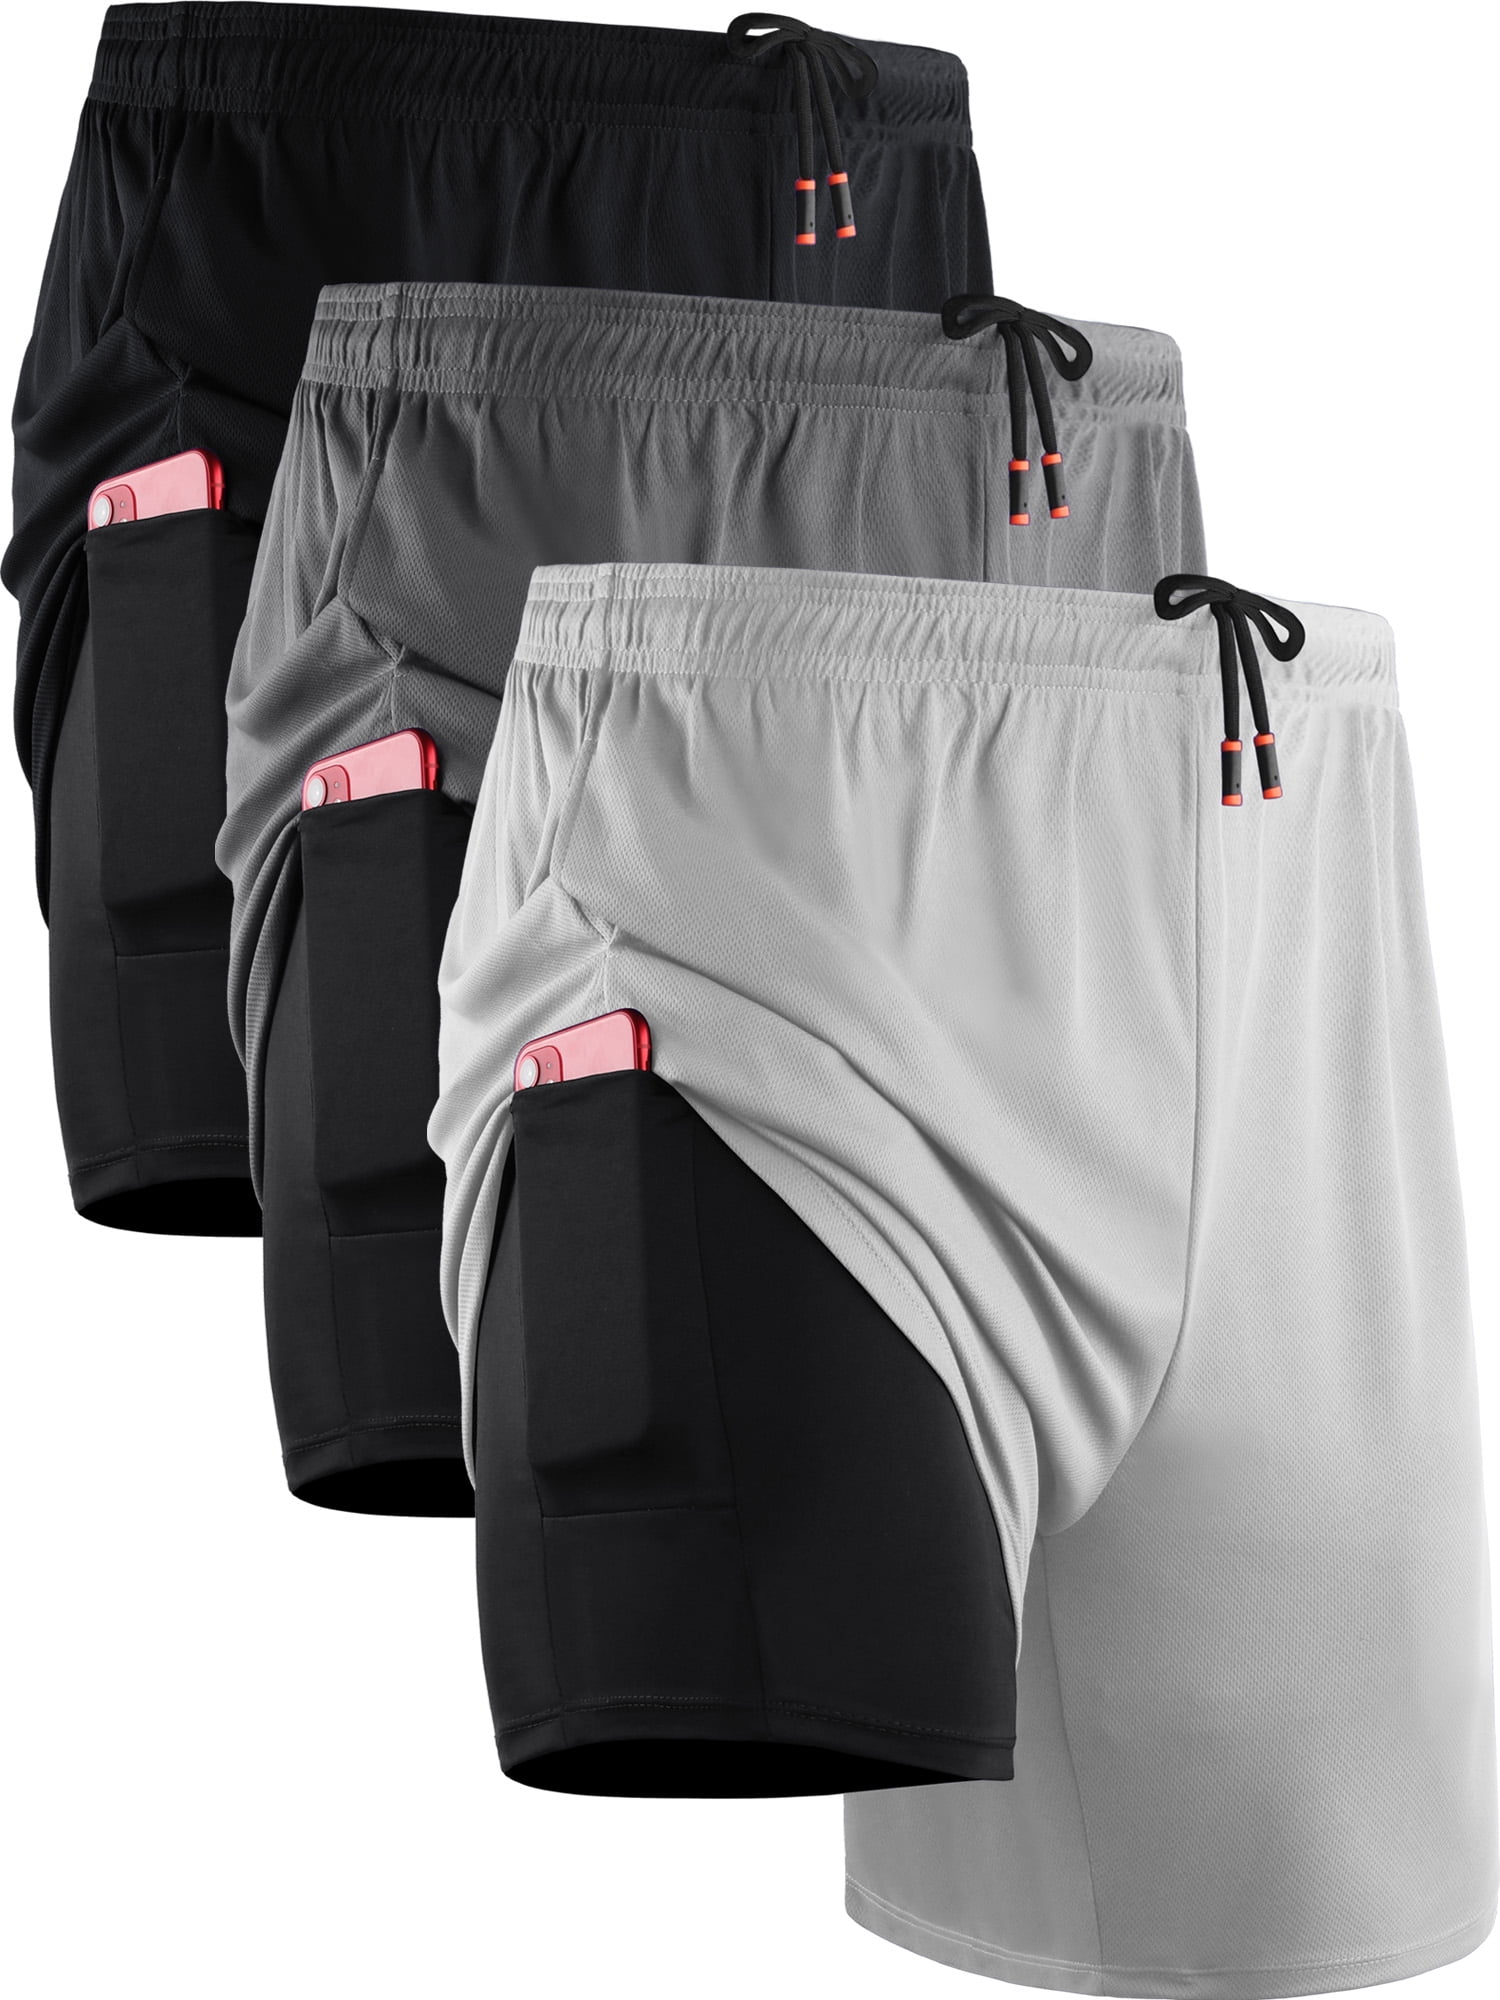 NELEUS Men Compression Shorts Pack Of 3 ,Valentine's Day Gifts